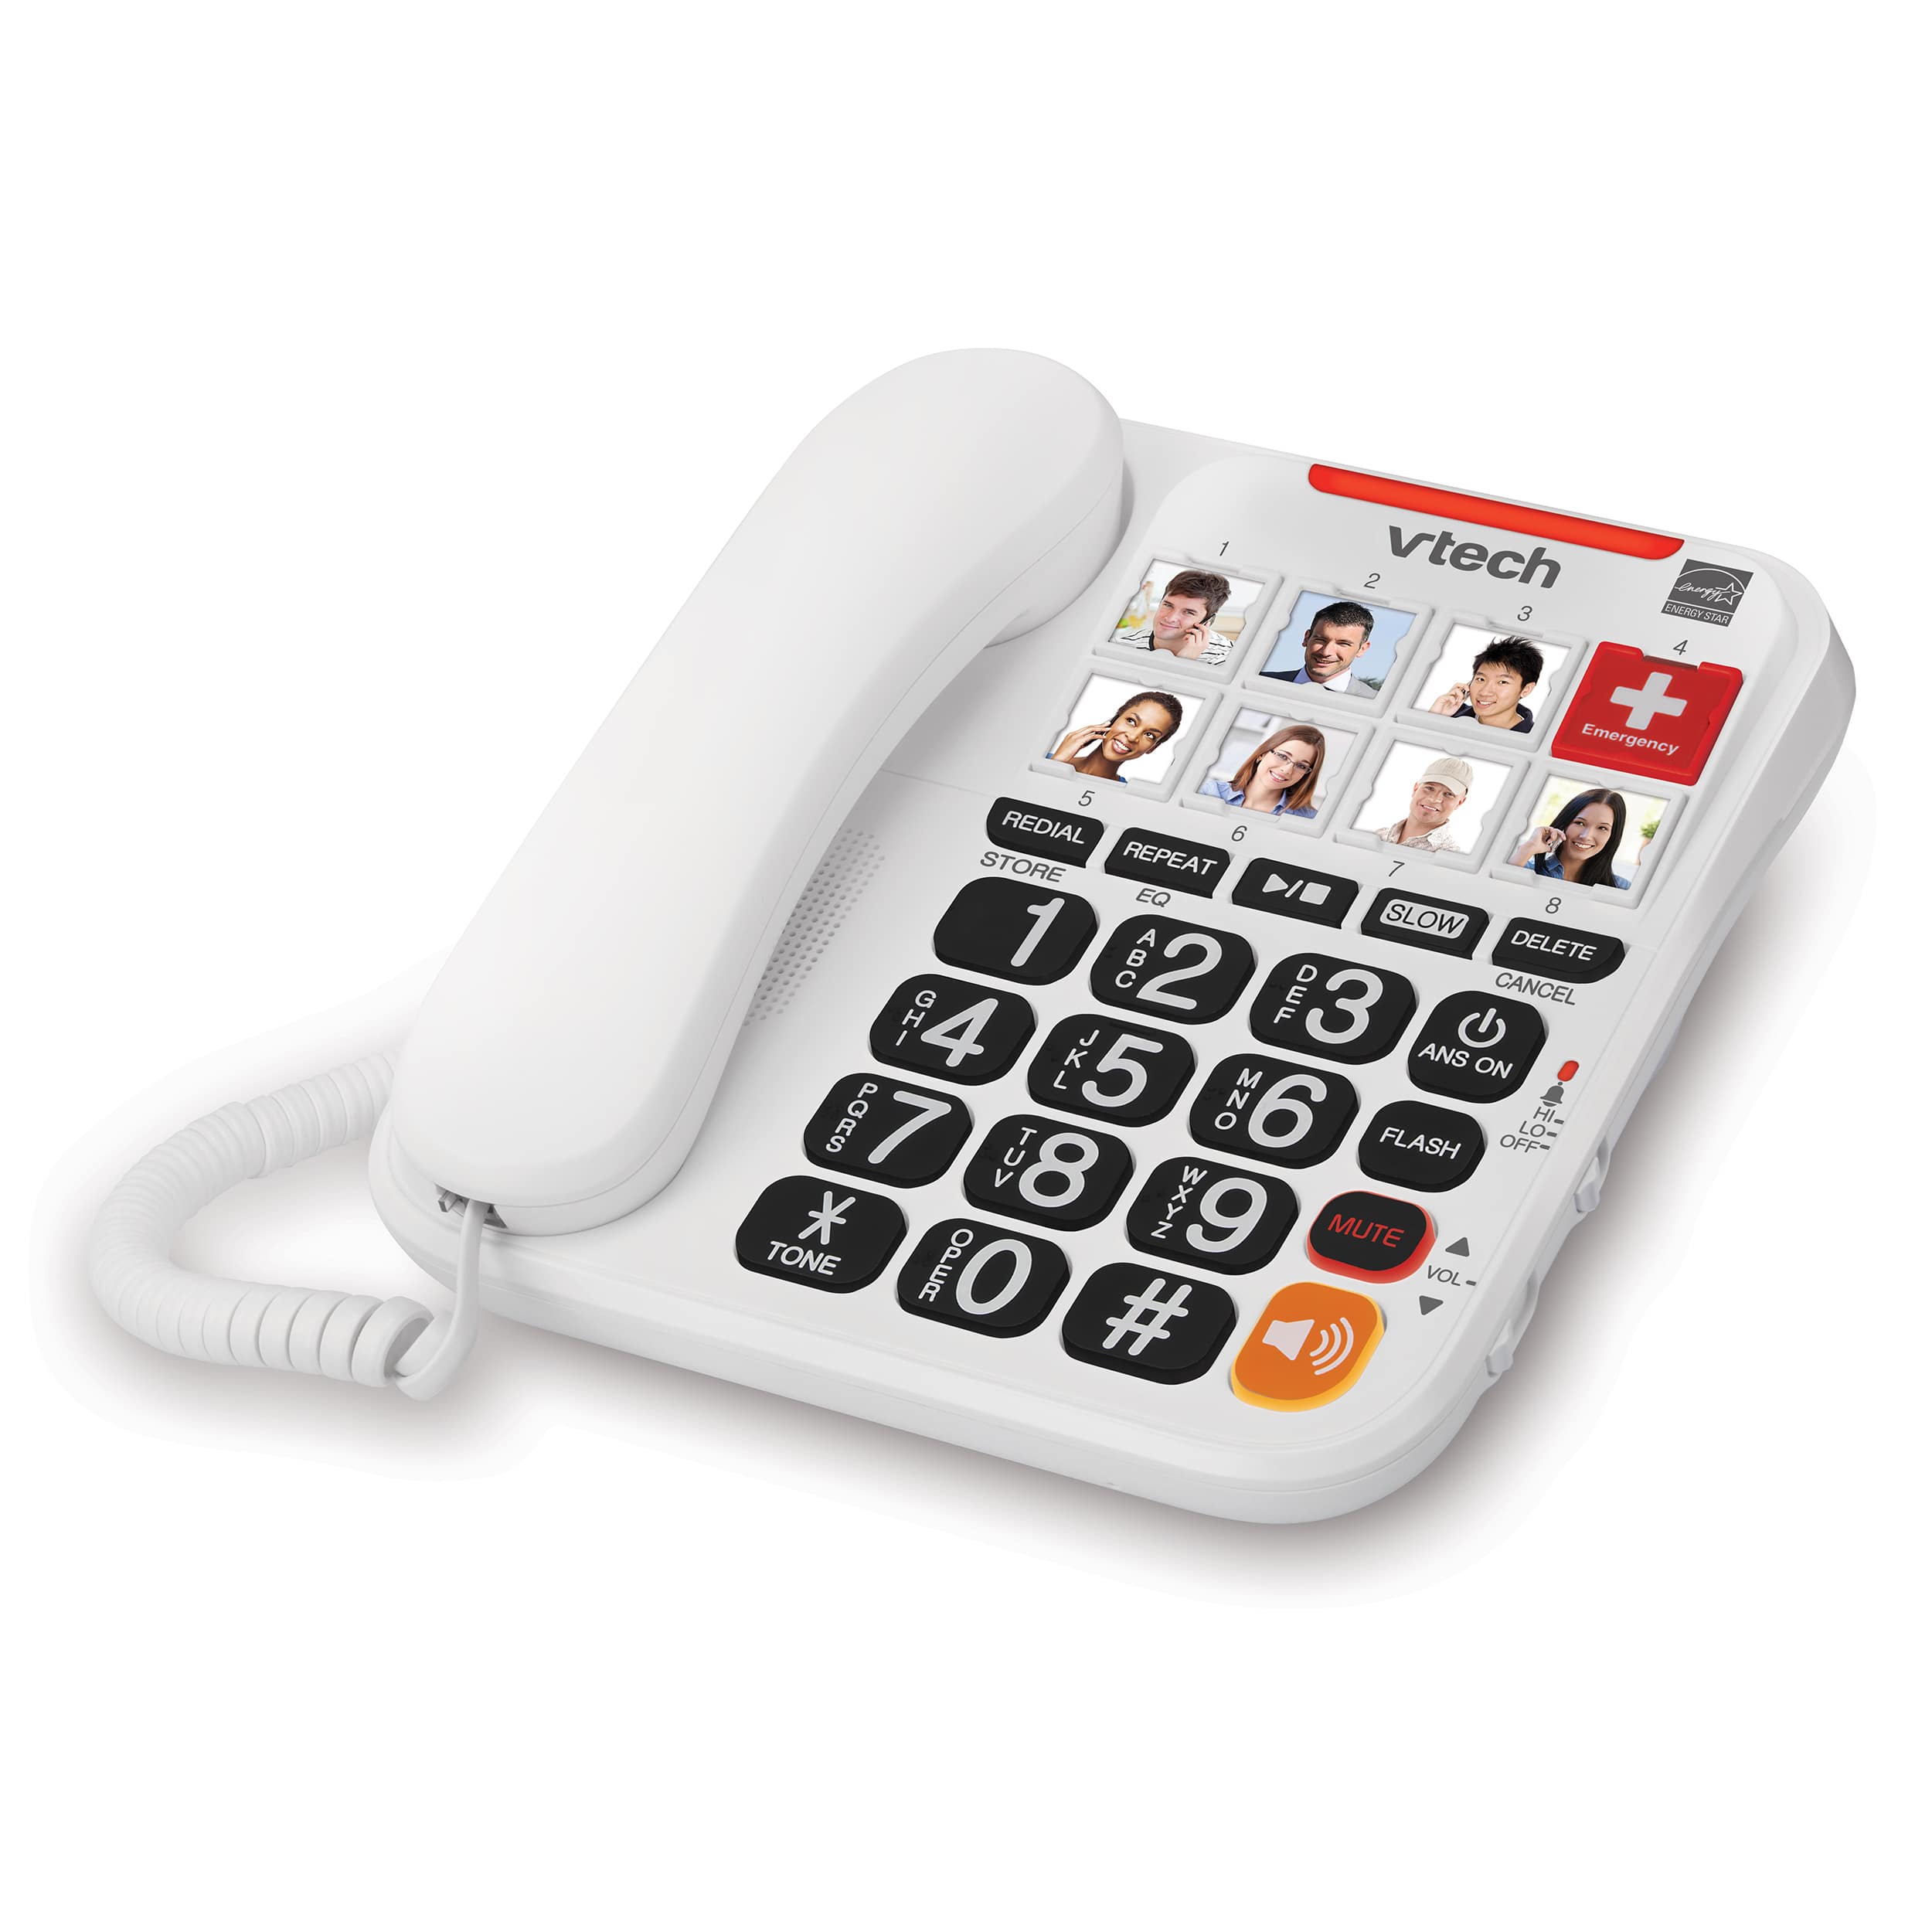 Amplified Corded Answering System with 8 Photo Speed Dial, 90dB Ringer Volume, Oversized High-Contrast buttons, and One-touch Audio Booster up to 40db - view 11